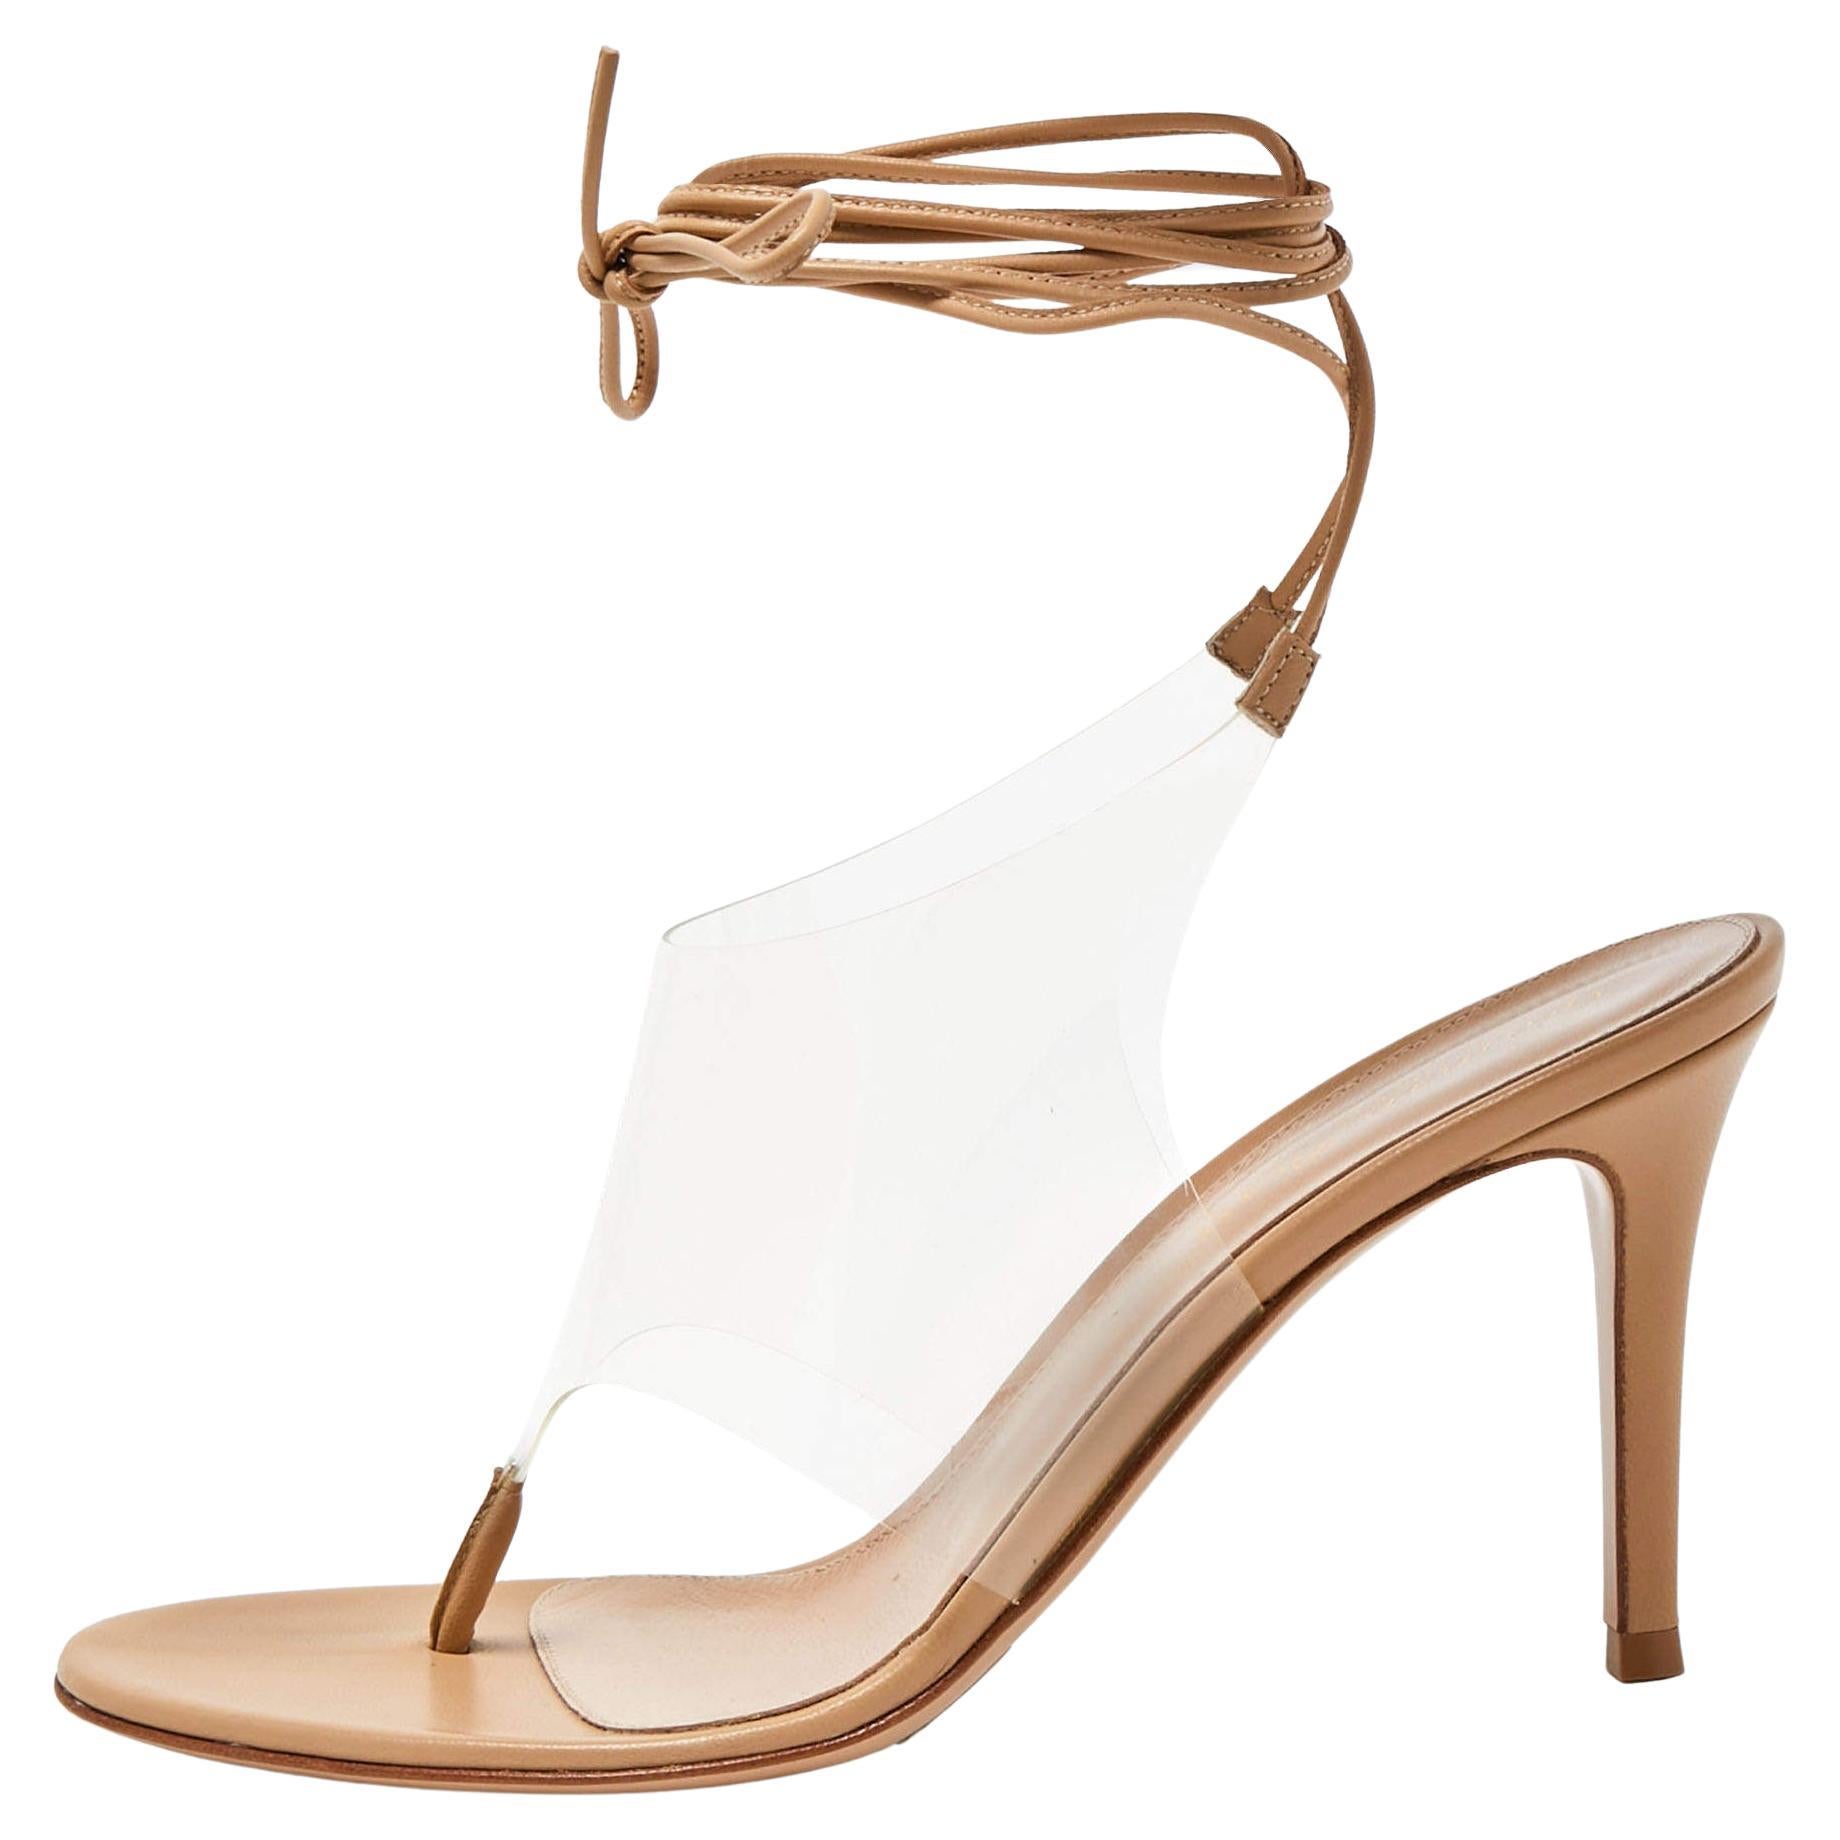 Gianvito Rossi Beige Leather and PVC Ankle Wrap Sandals Size 36